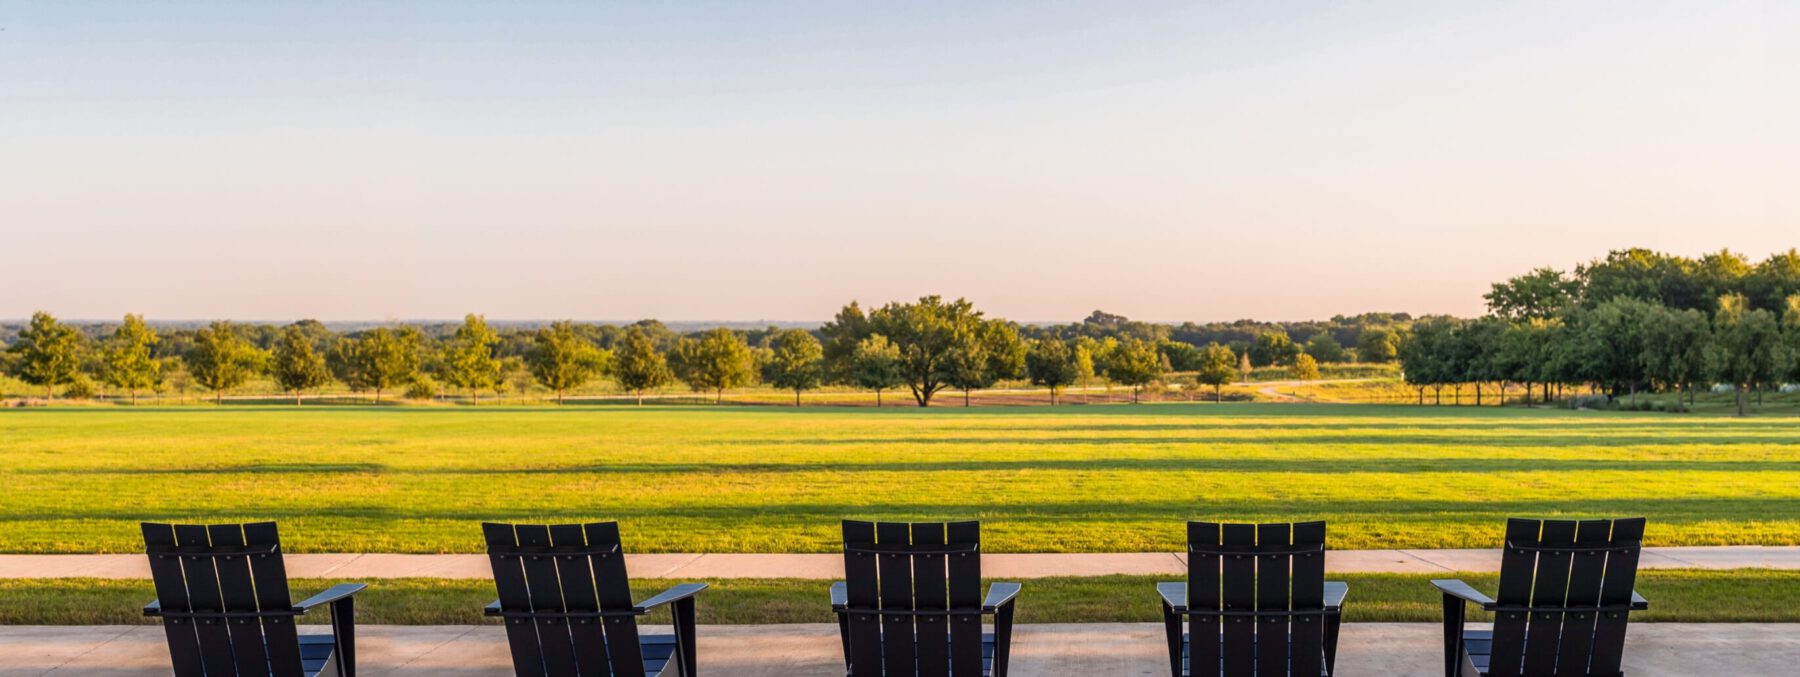 Lawn chairs overlooking the Texas landscape at sunset, with a lawn of green grass and trees in the background